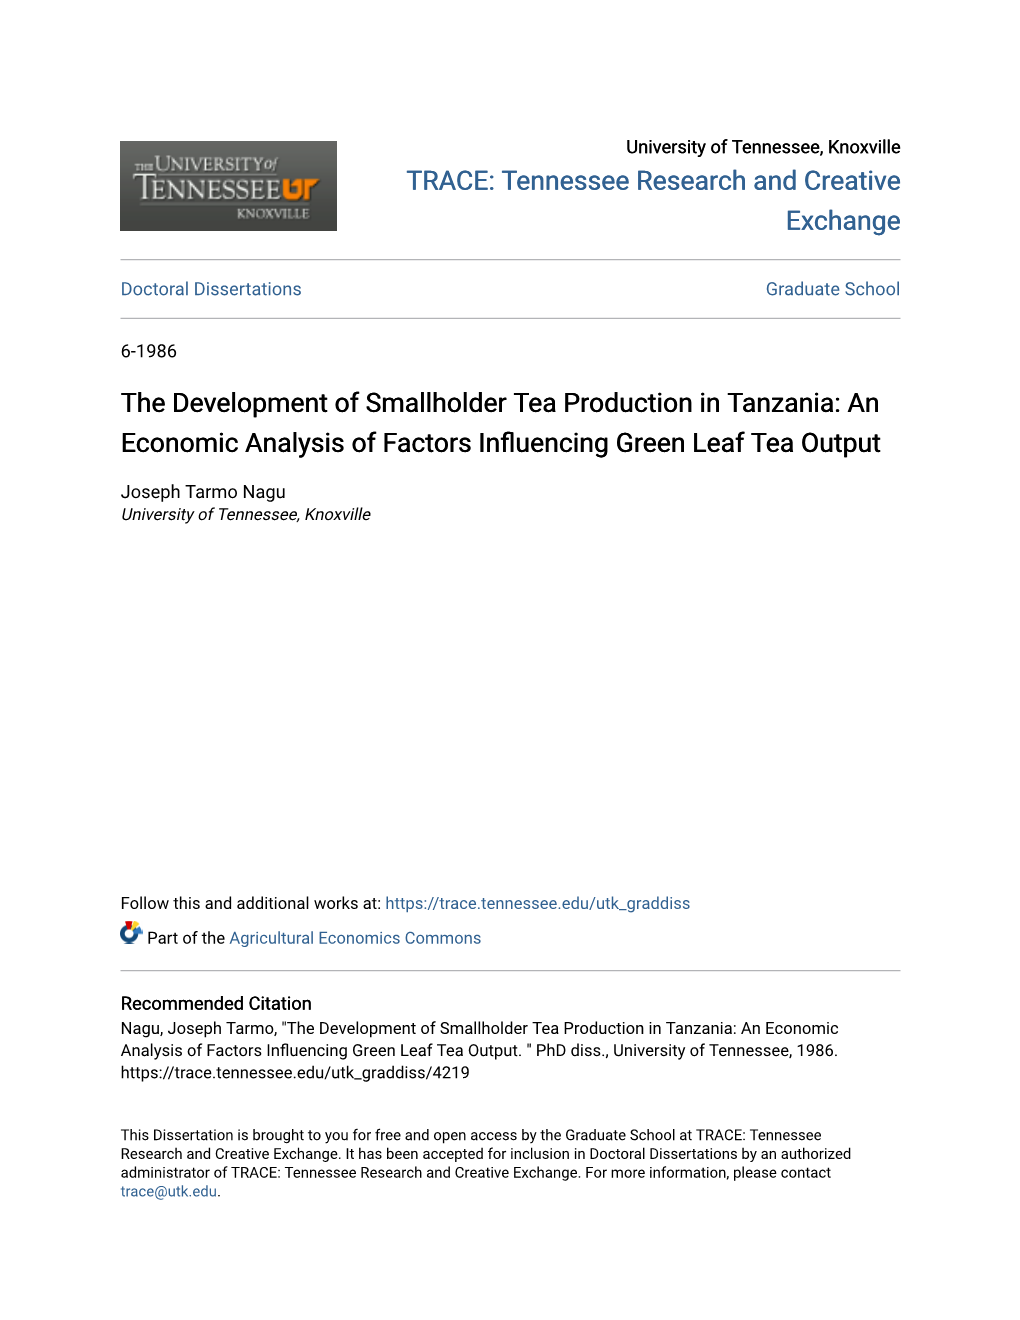 The Development of Smallholder Tea Production in Tanzania: an Economic Analysis of Factors Influencing Green Leaf Tea Output